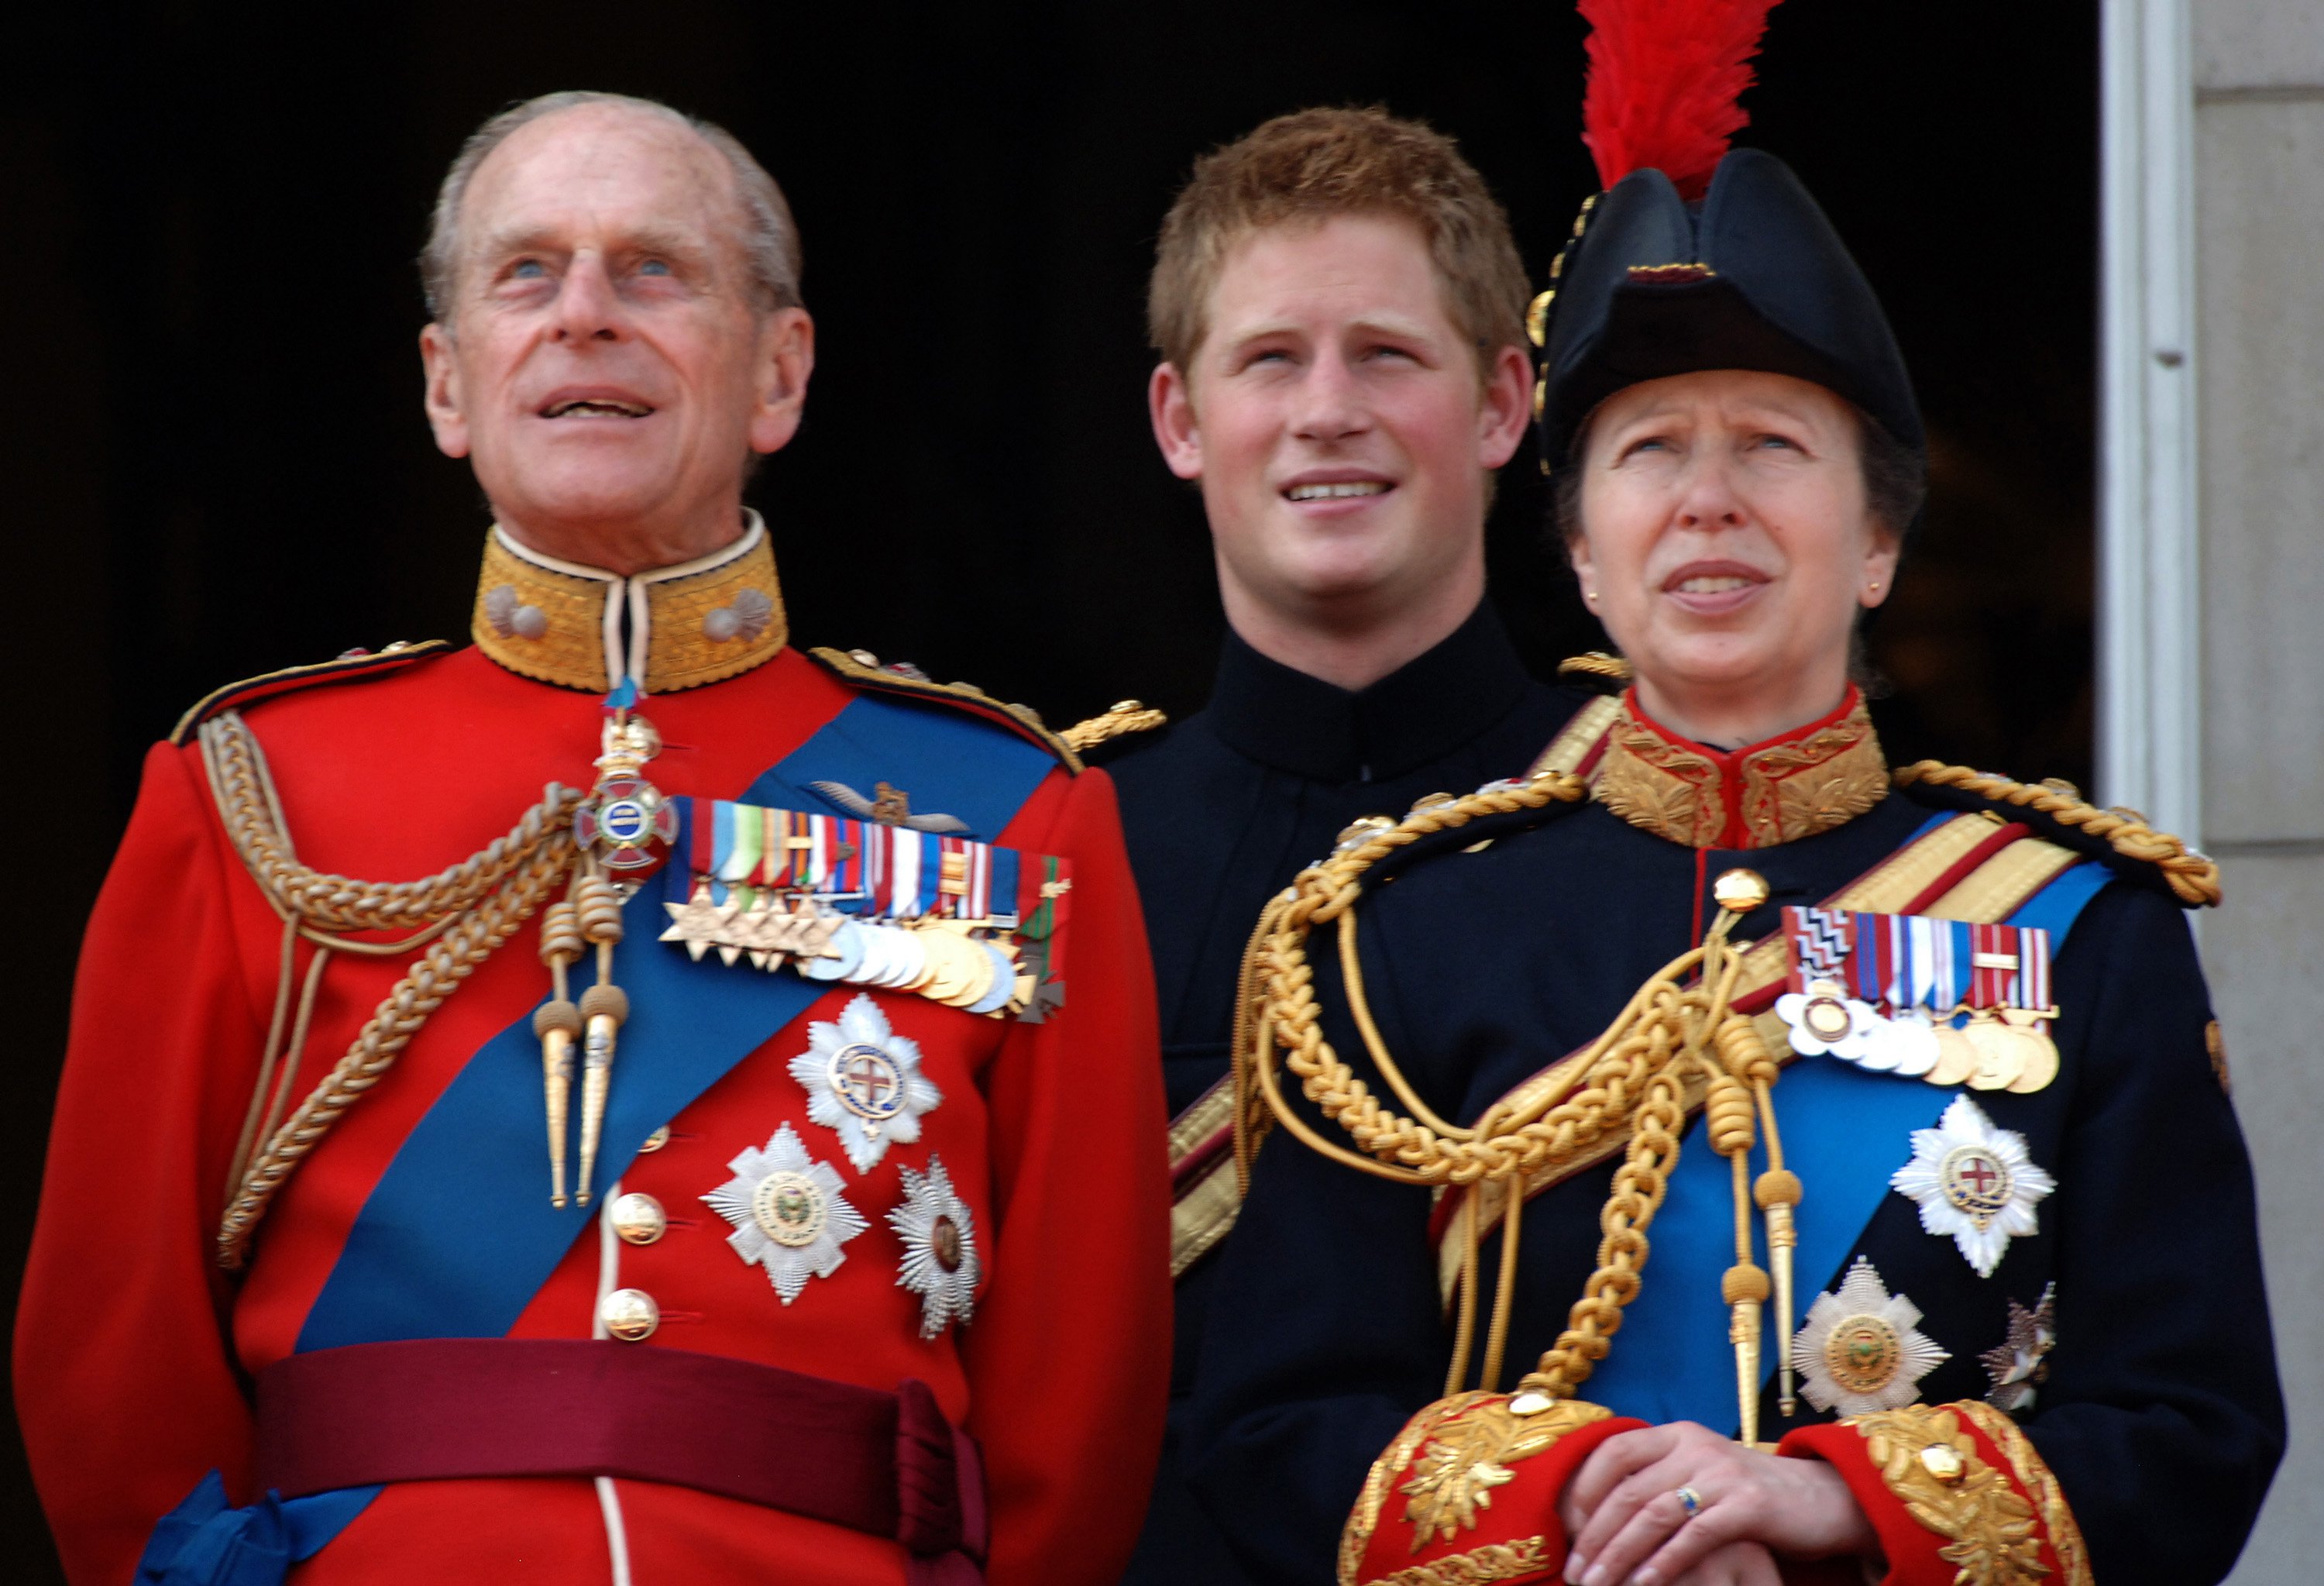 Prince Philip, Duke of Edinburgh,Prince Harry and Princess Anne on the balcony of Buckingham Palace following the Trooping the Colour ceremony on June 17, 2006Prince Philip, Duke of Edinburgh,Prince Harry and Princess Anne on the balcony of Buckingham Palace following the Trooping the Colour ceremony on June 17, 2006 | Source: Getty Images 